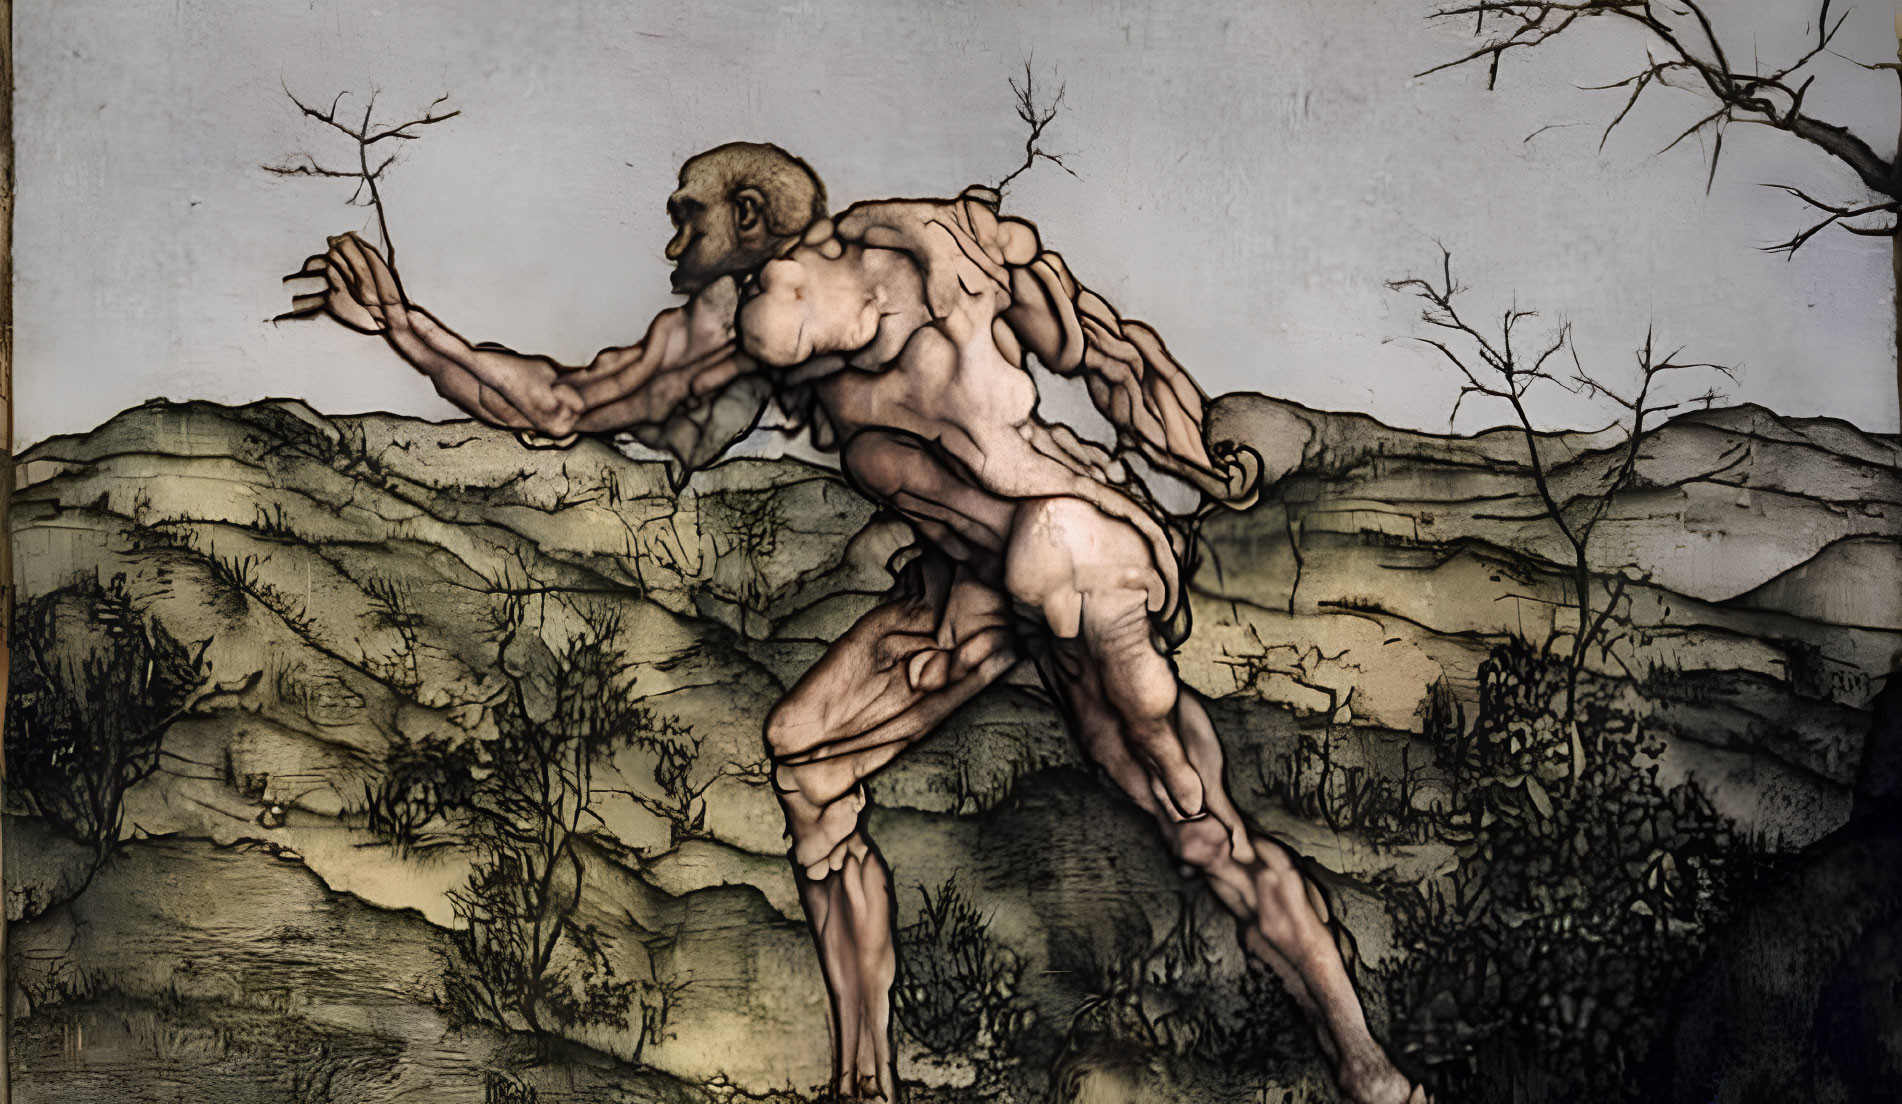 Muscular humanoid figure with animal head in dynamic pose against barren landscape